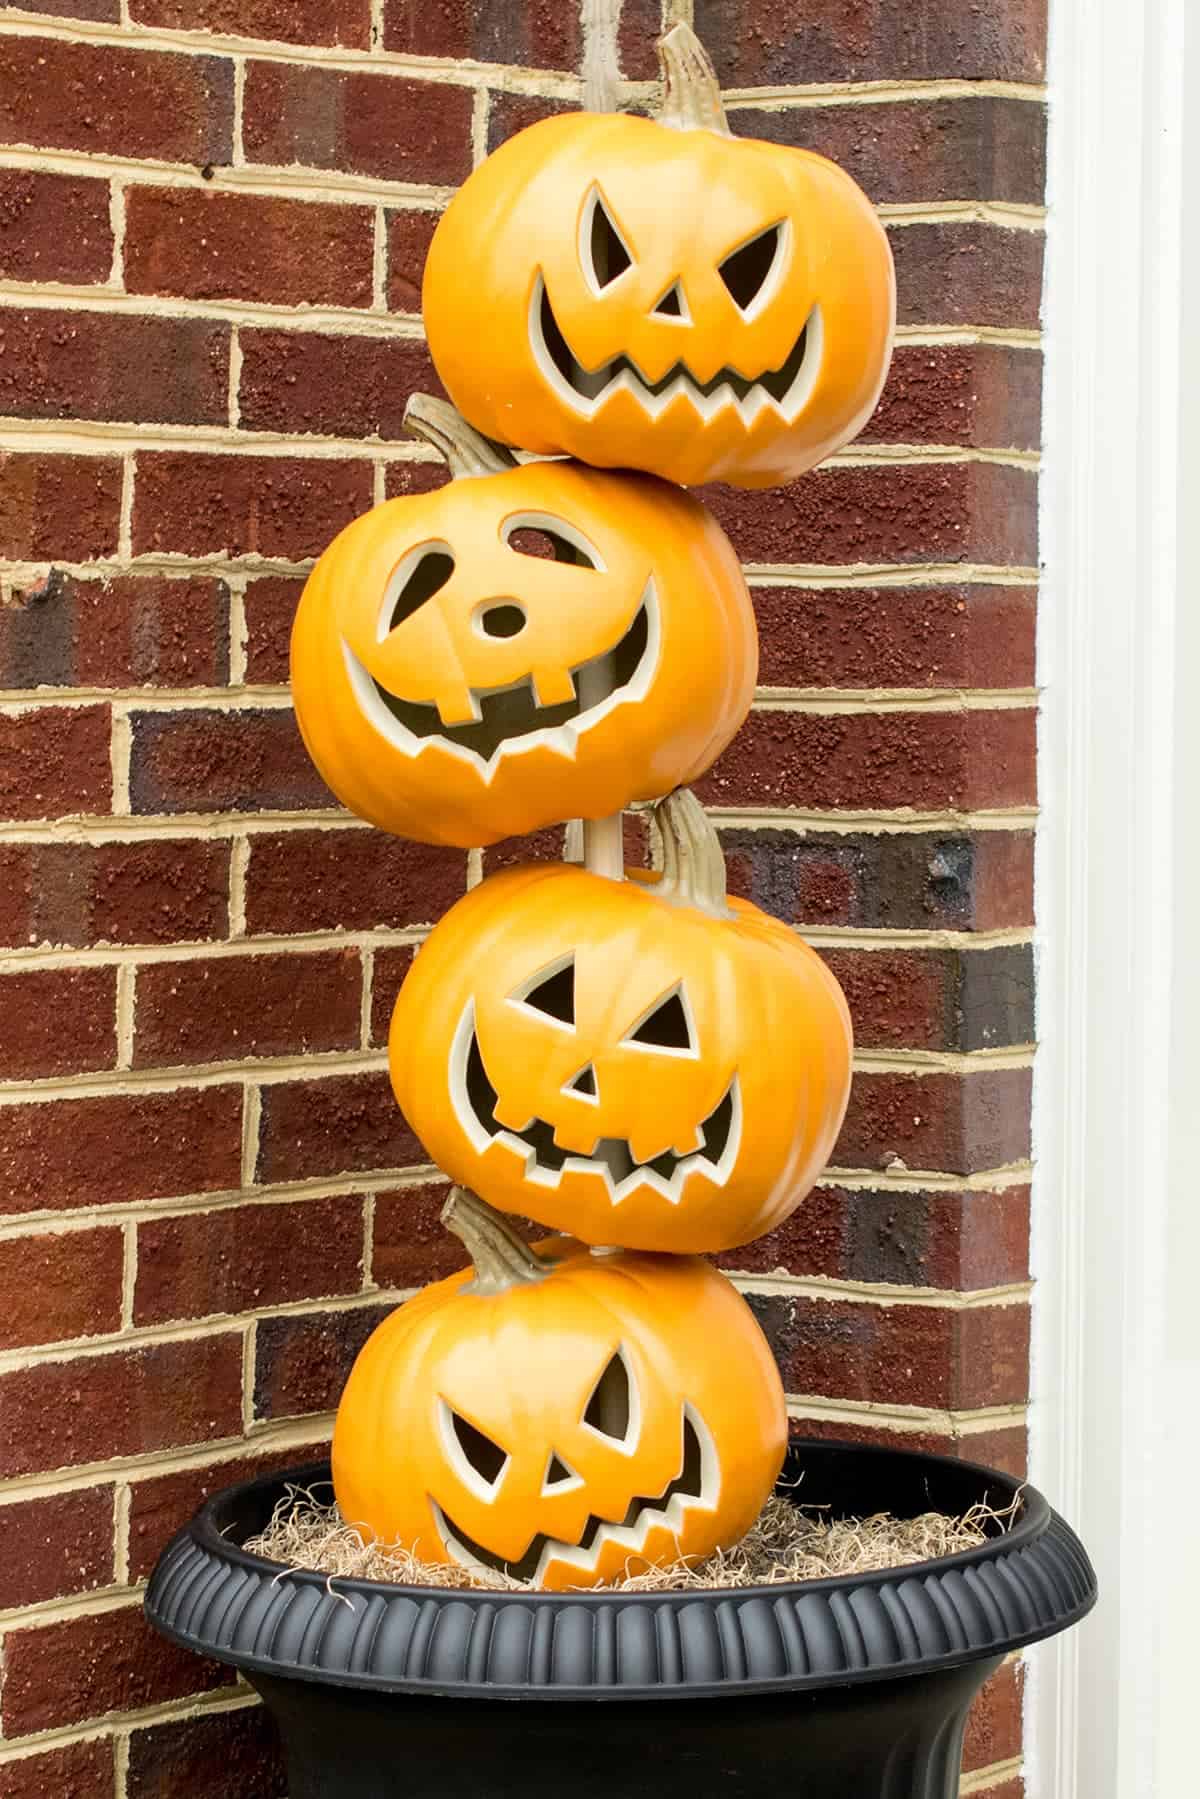 Stacked Pumpkin Heads to make a pumpkin topiary that is being used for Halloween front door decor.